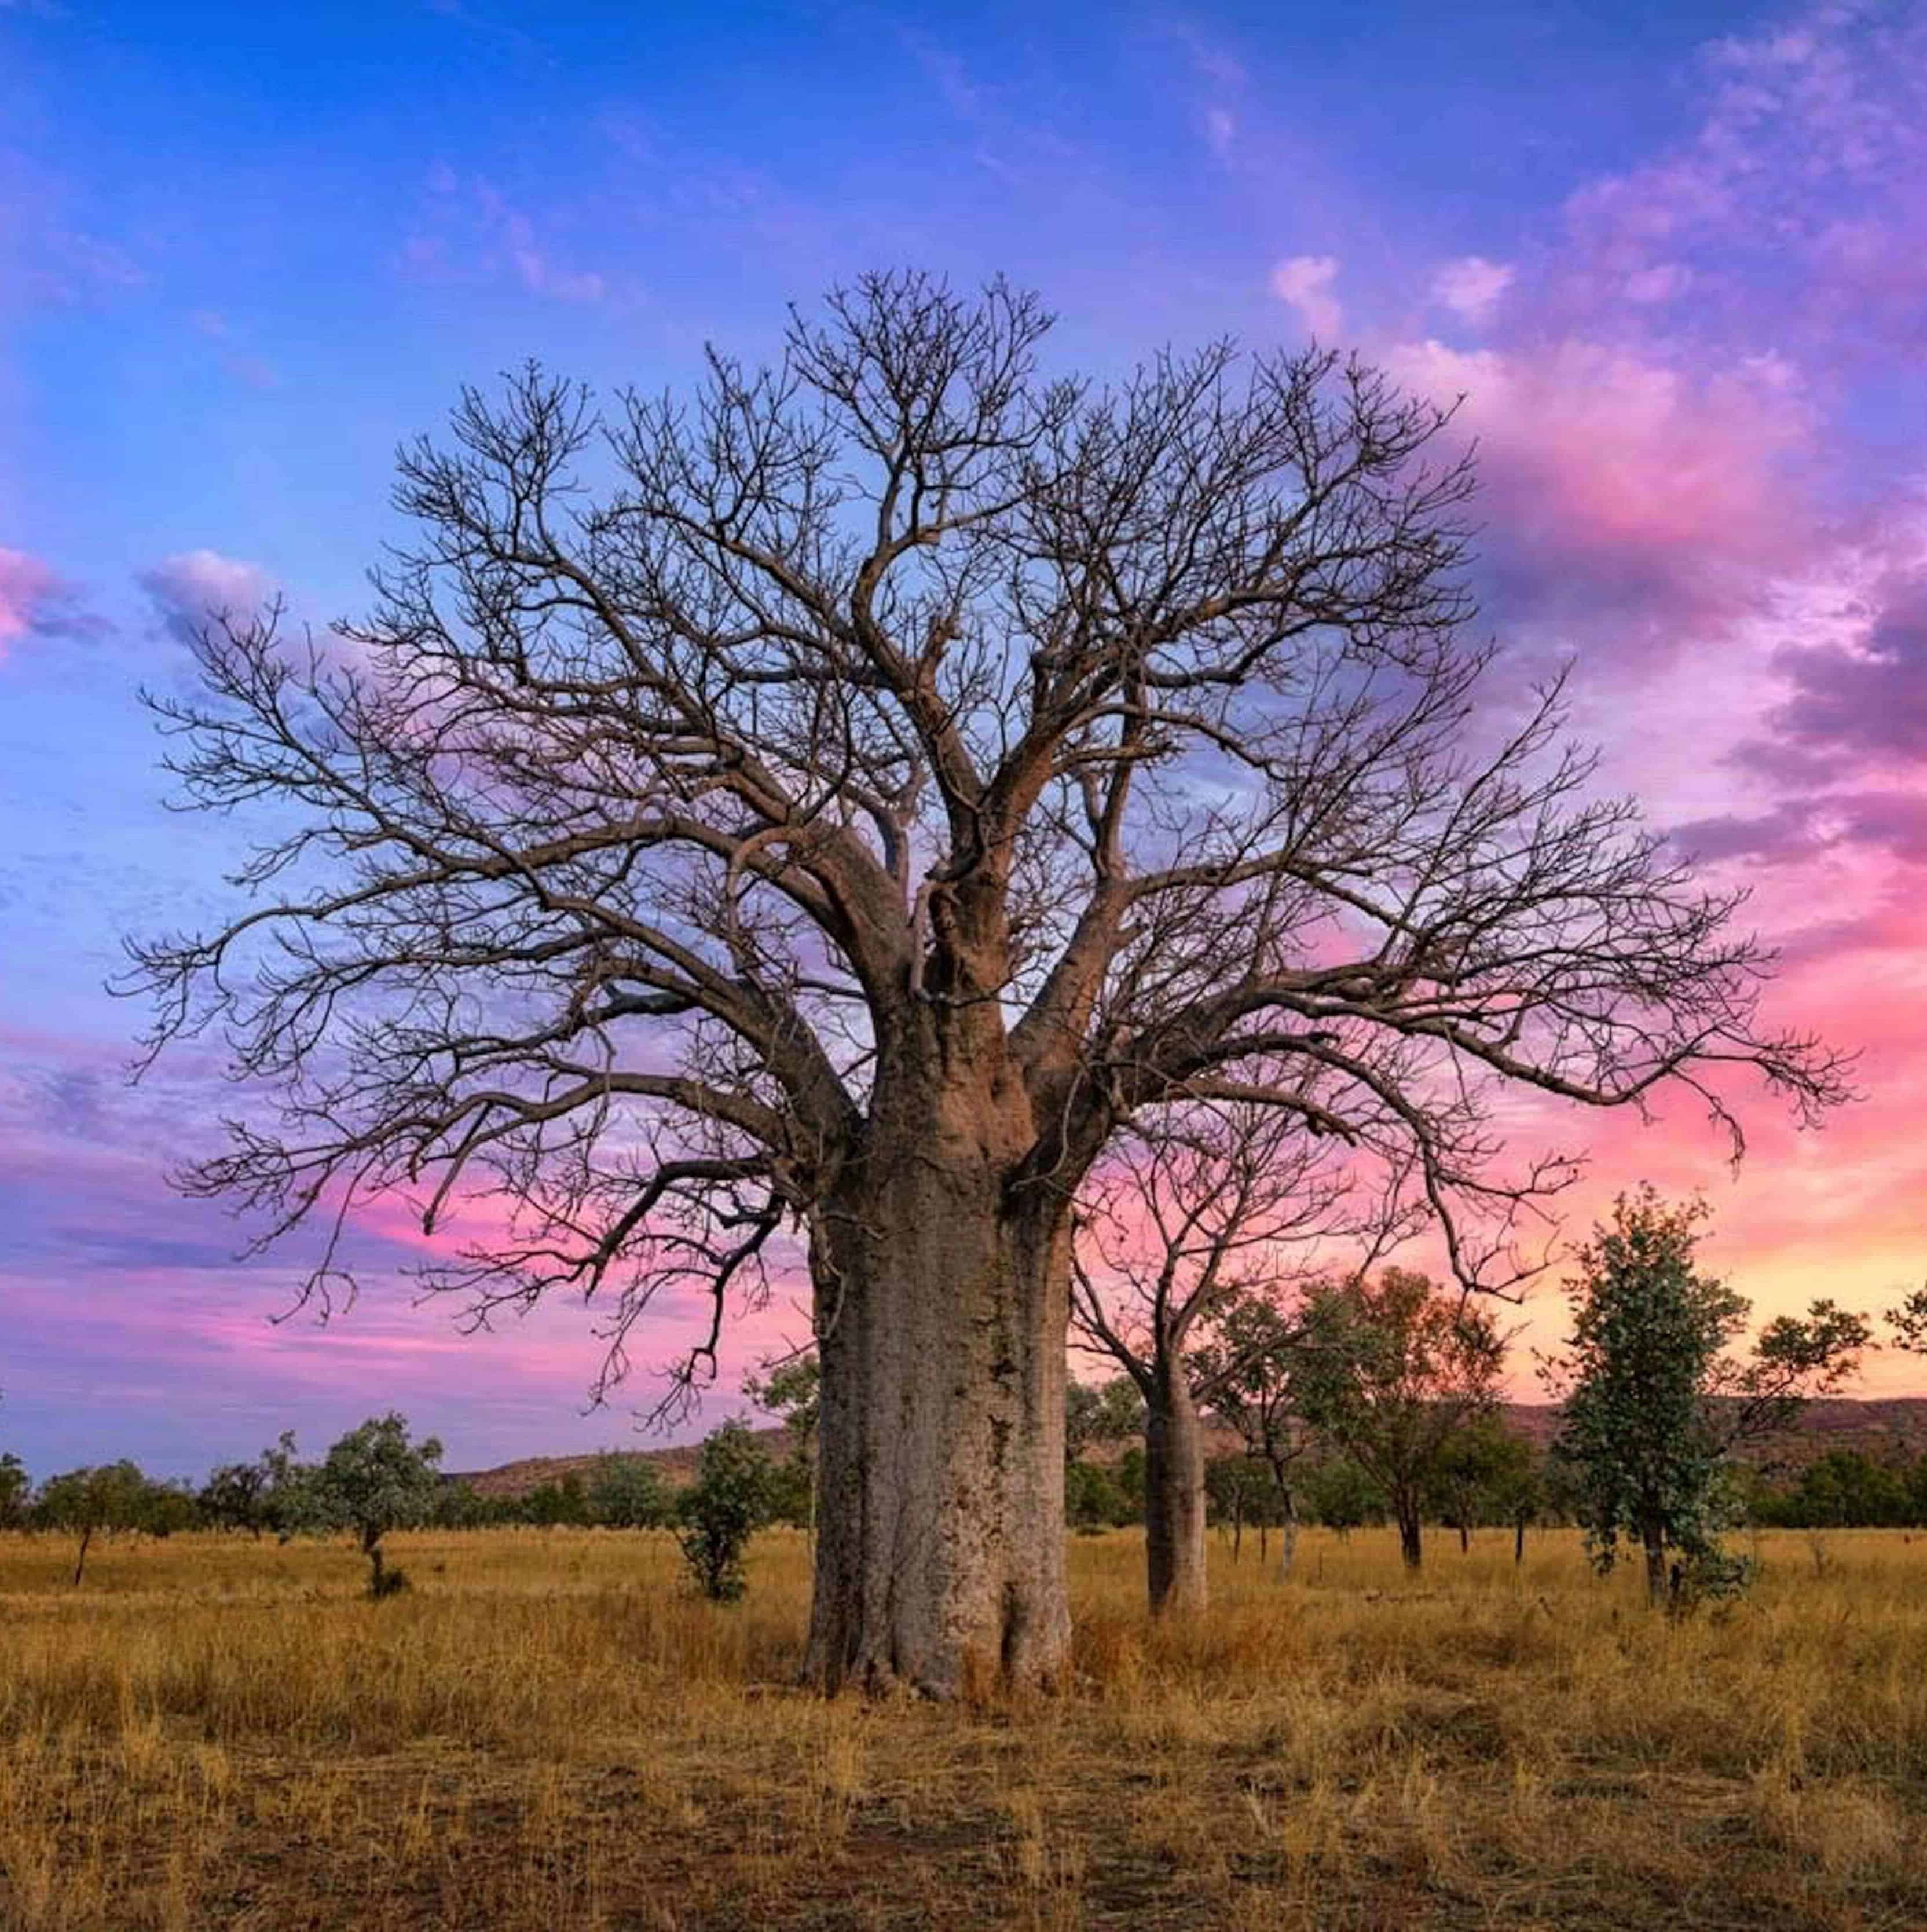 purple-pink sunset with large tree with no leaves in the Kimberleys